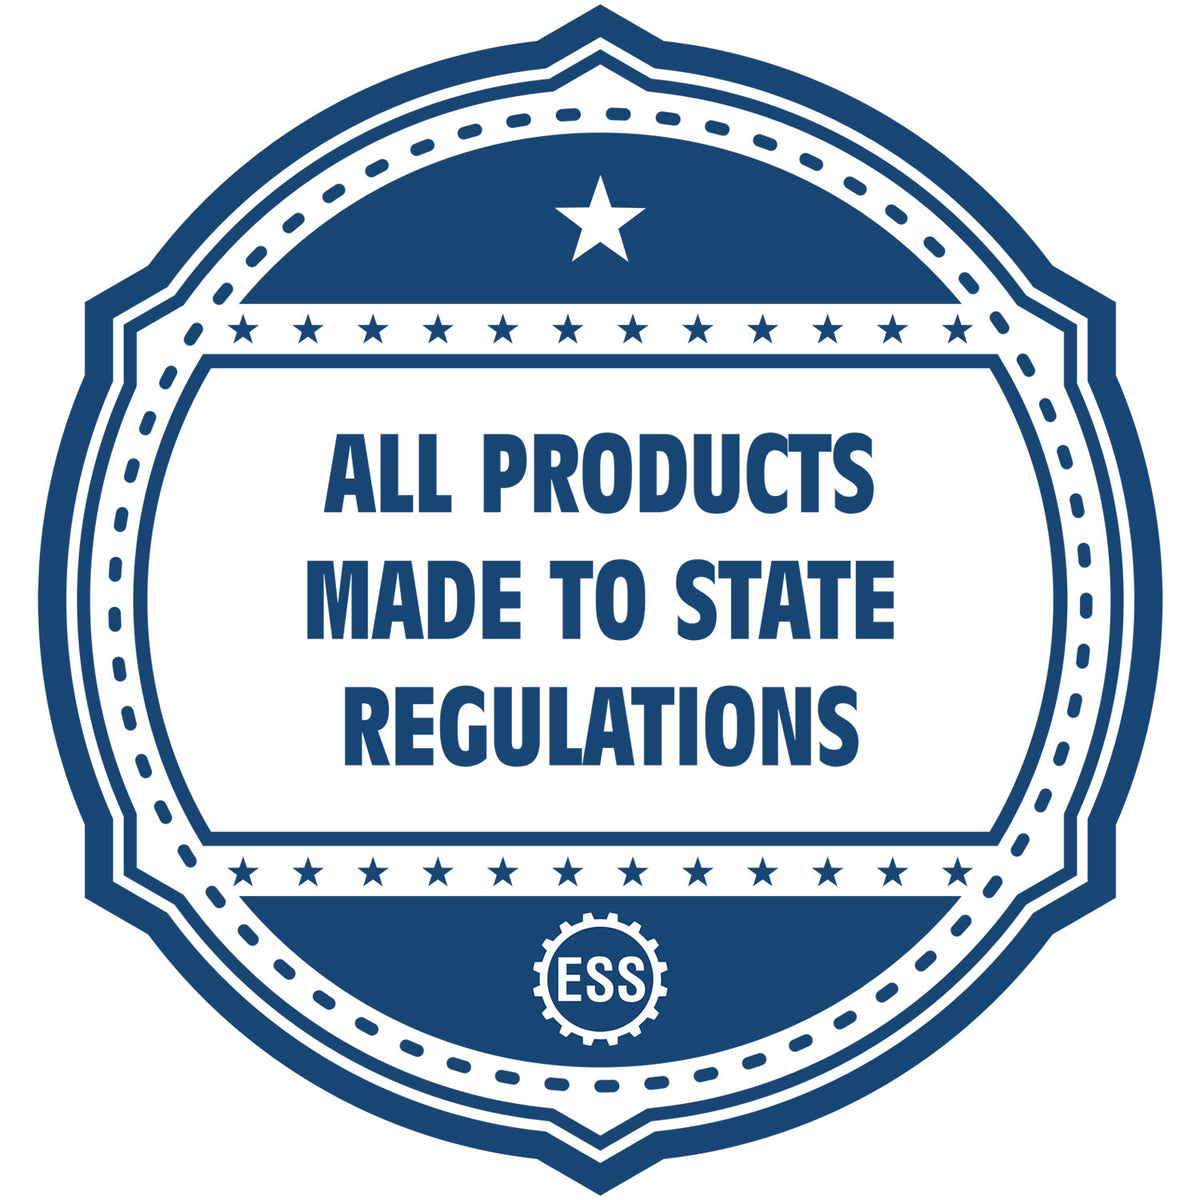 An icon or badge element for the State of Tennessee Architectural Seal Embosser showing that this product is made in compliance with state regulations.